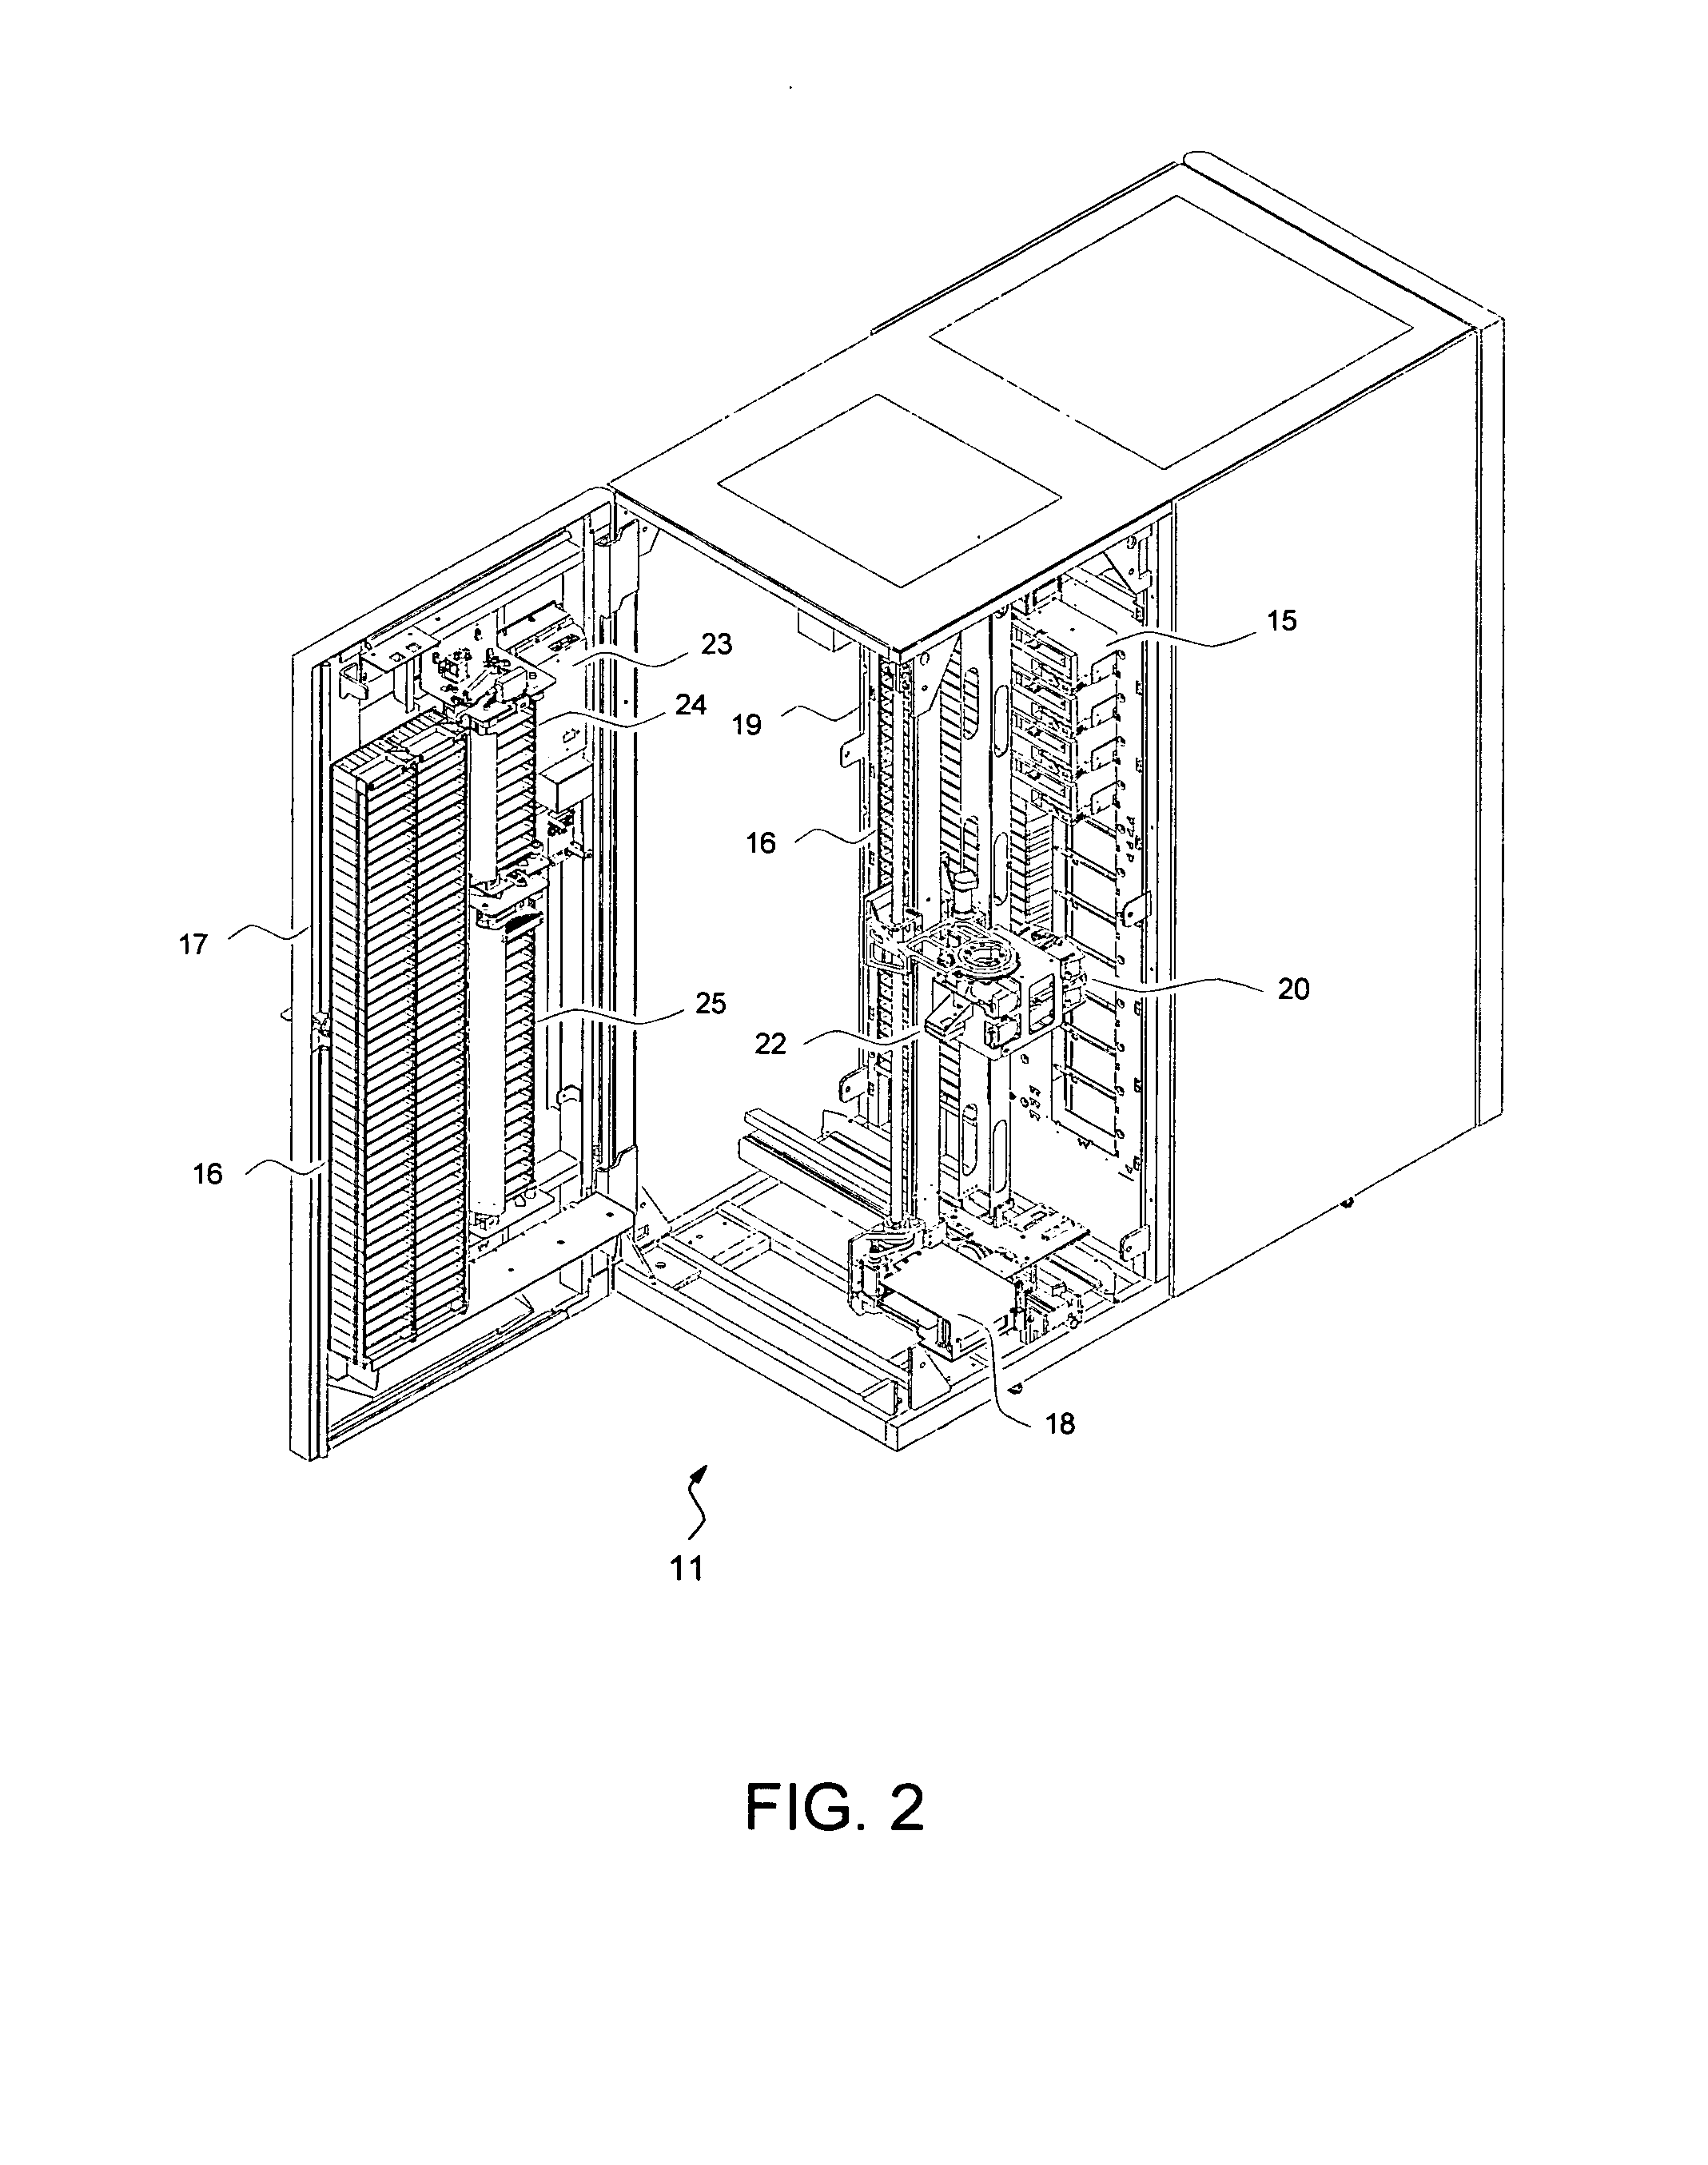 Management of data cartridges in multiple-cartridge cells in an automated data storage library